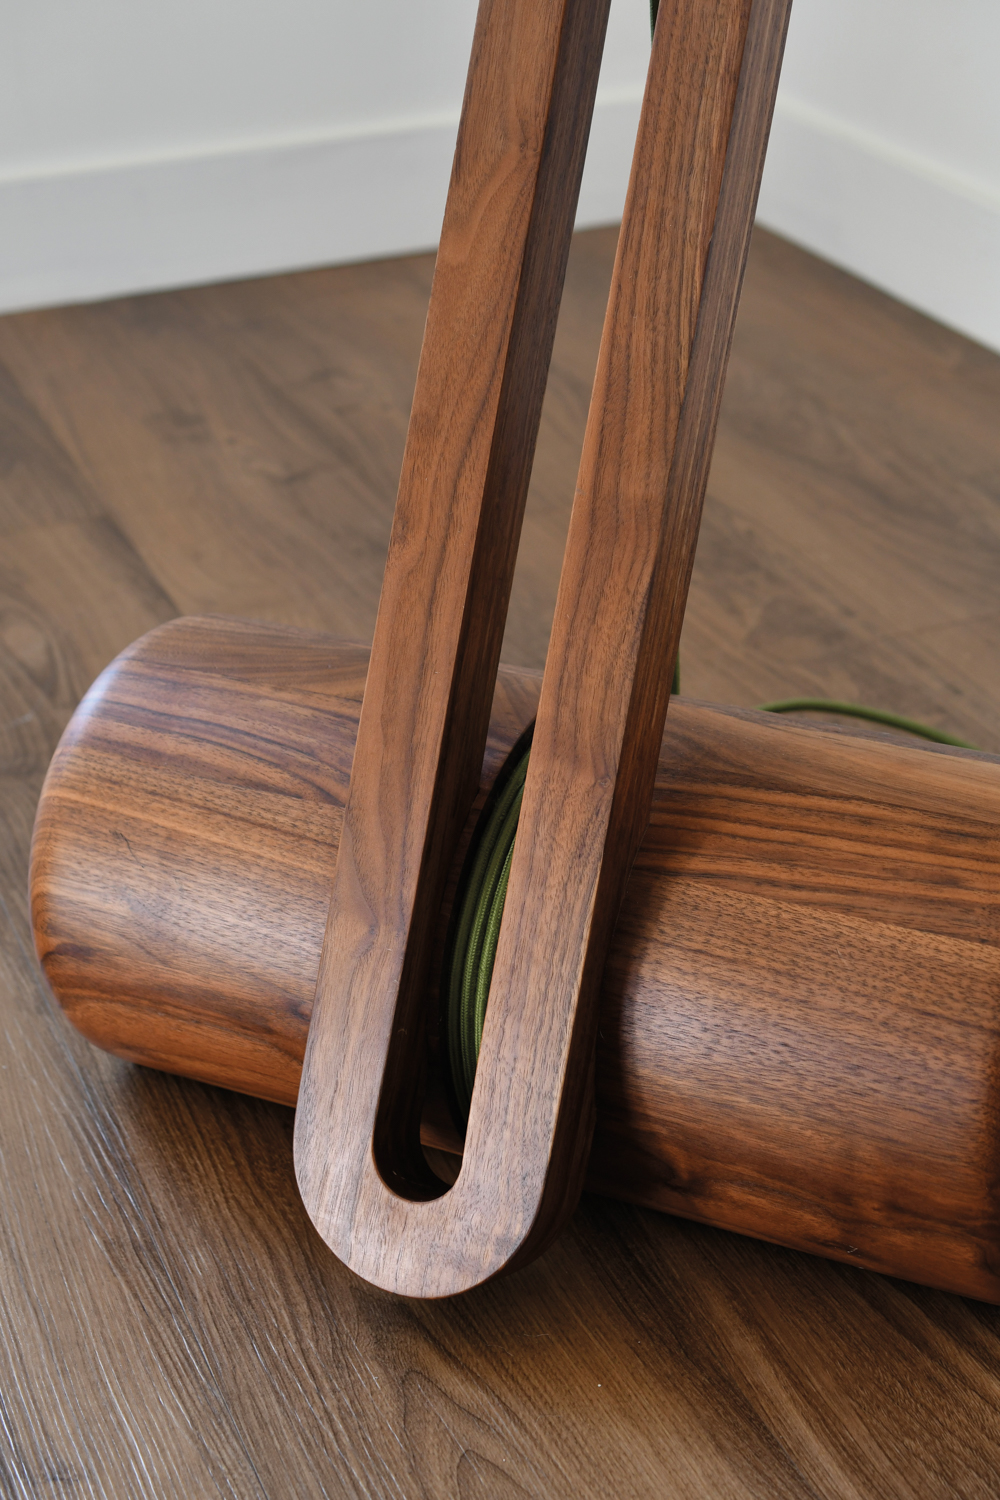 leg detailing on a wooden furniture piece from Last Ditch Design